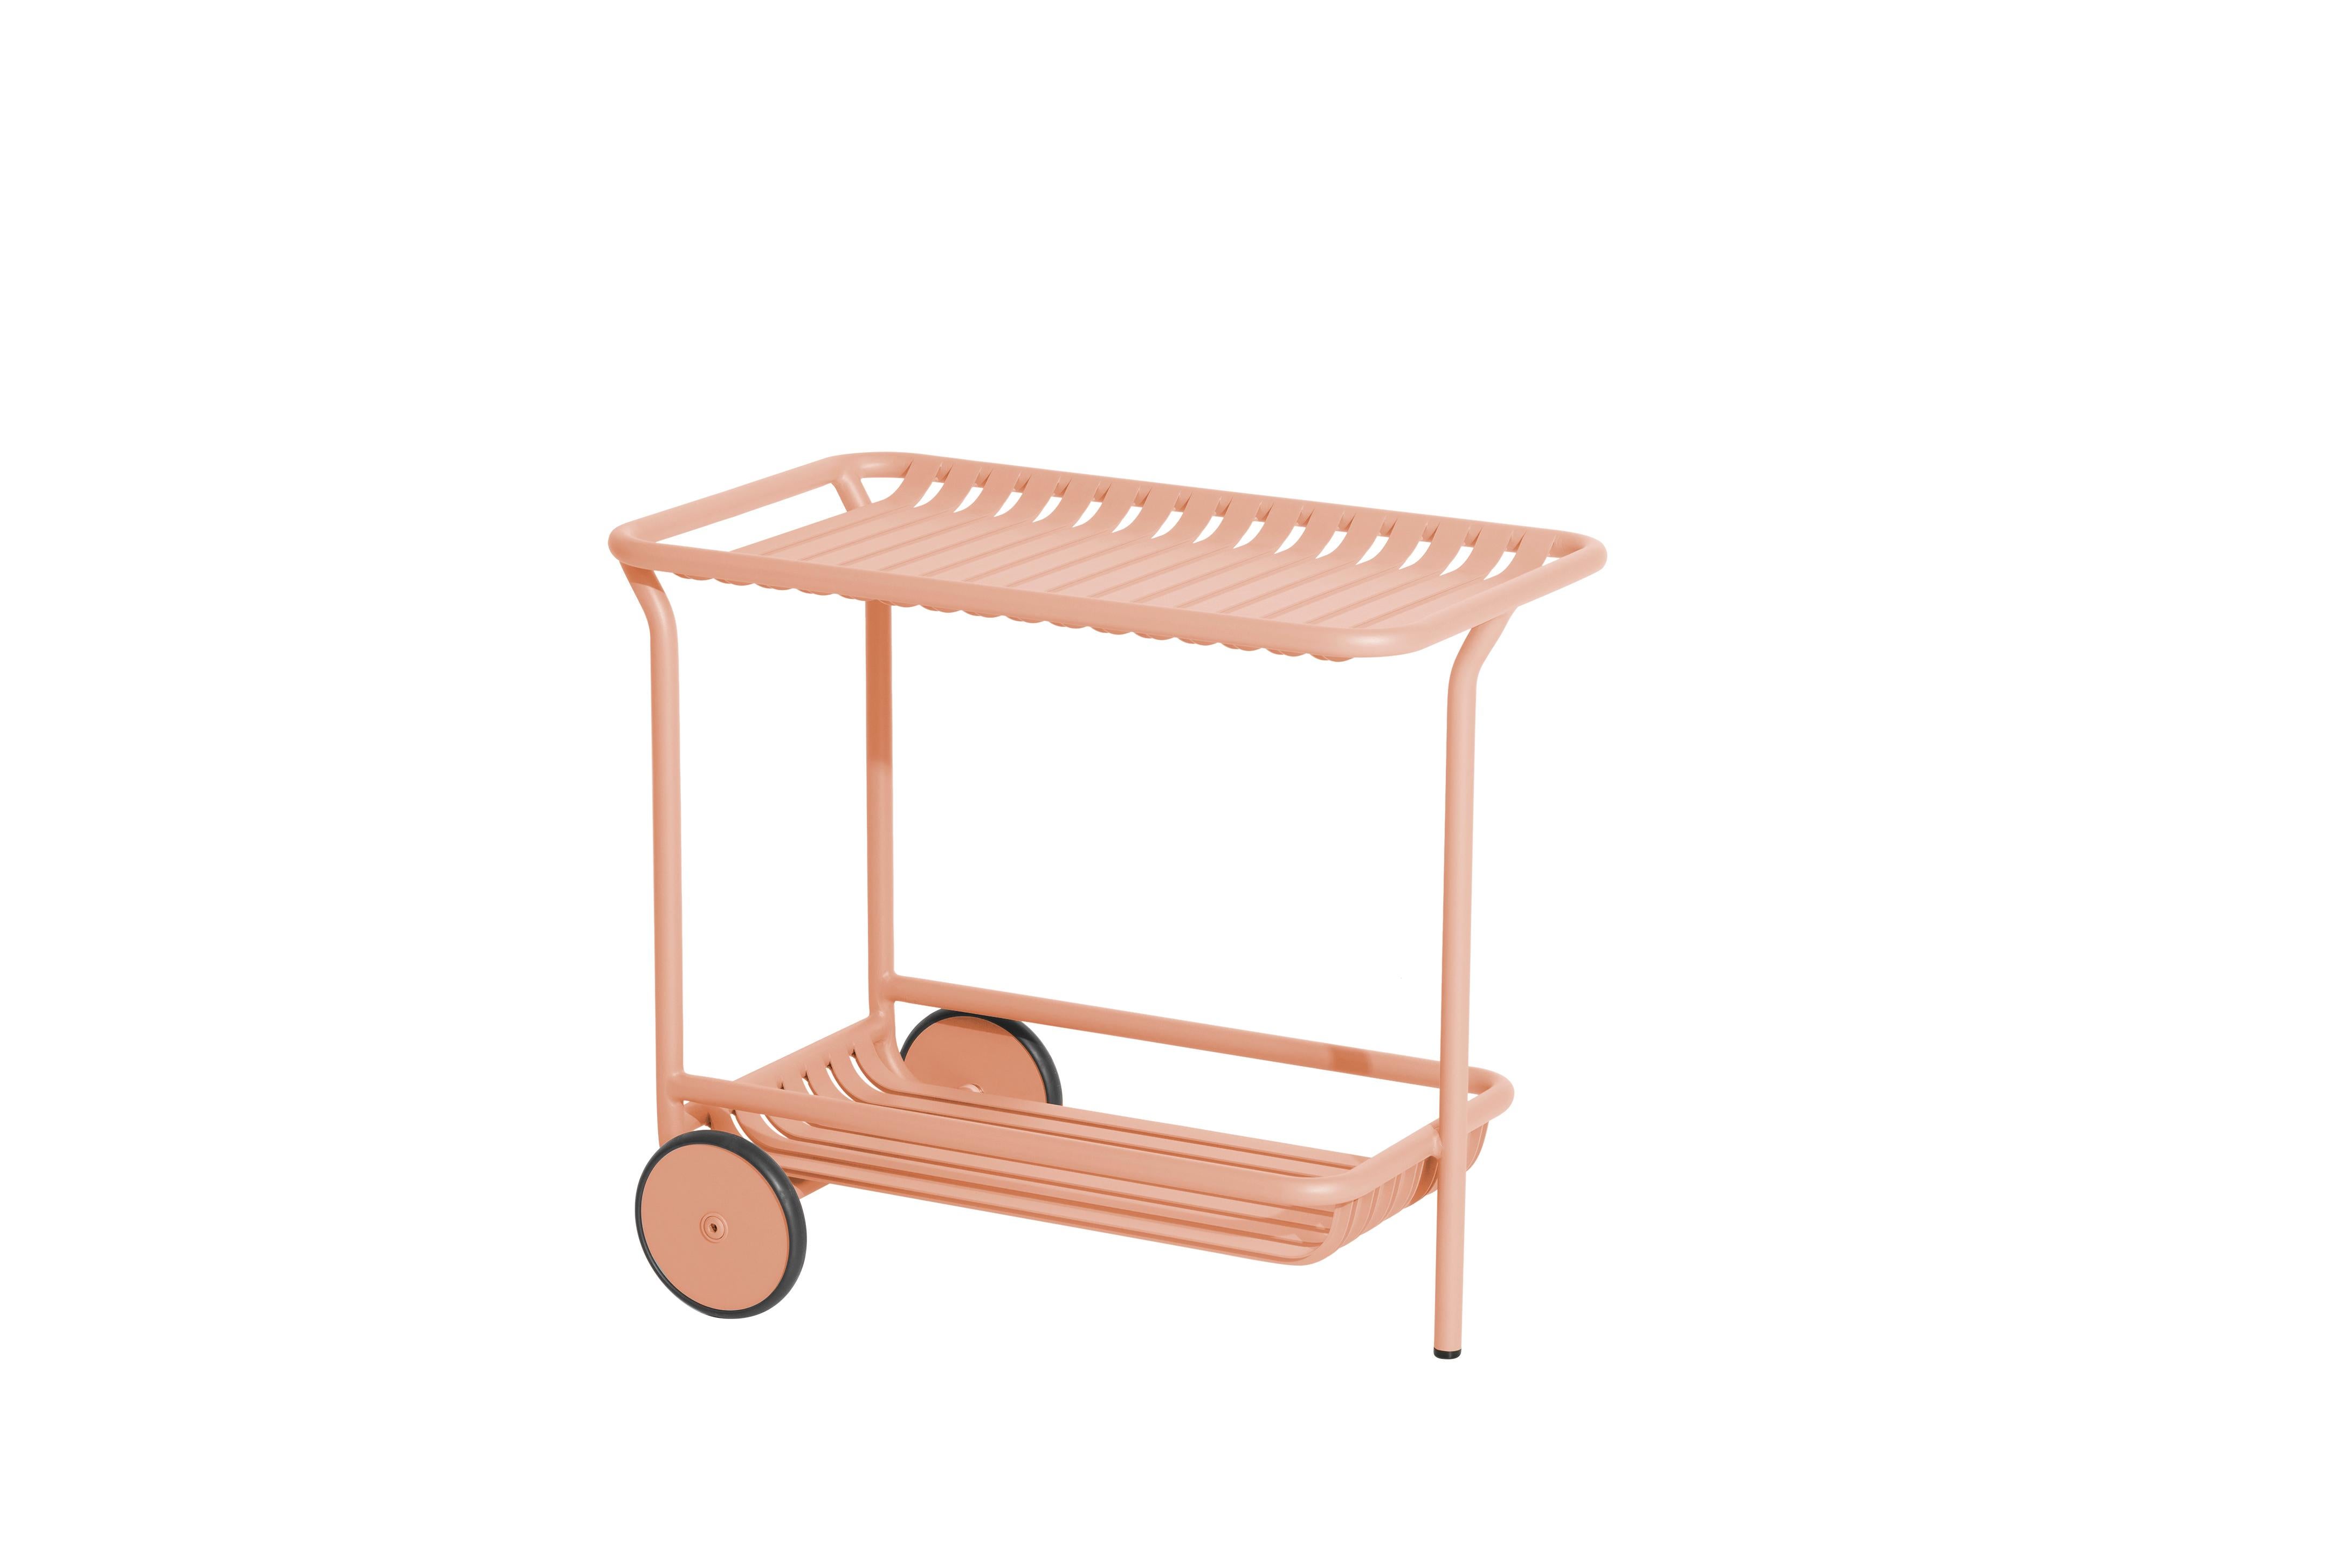 Petite Friture Week-End Trolley in Blush Aluminium by Studio BrichetZiegler, 2017

The week-end collection is a full range of outdoor furniture, in aluminium grained epoxy paint, matt finish, that includes 18 functions and 8 colours for the retail